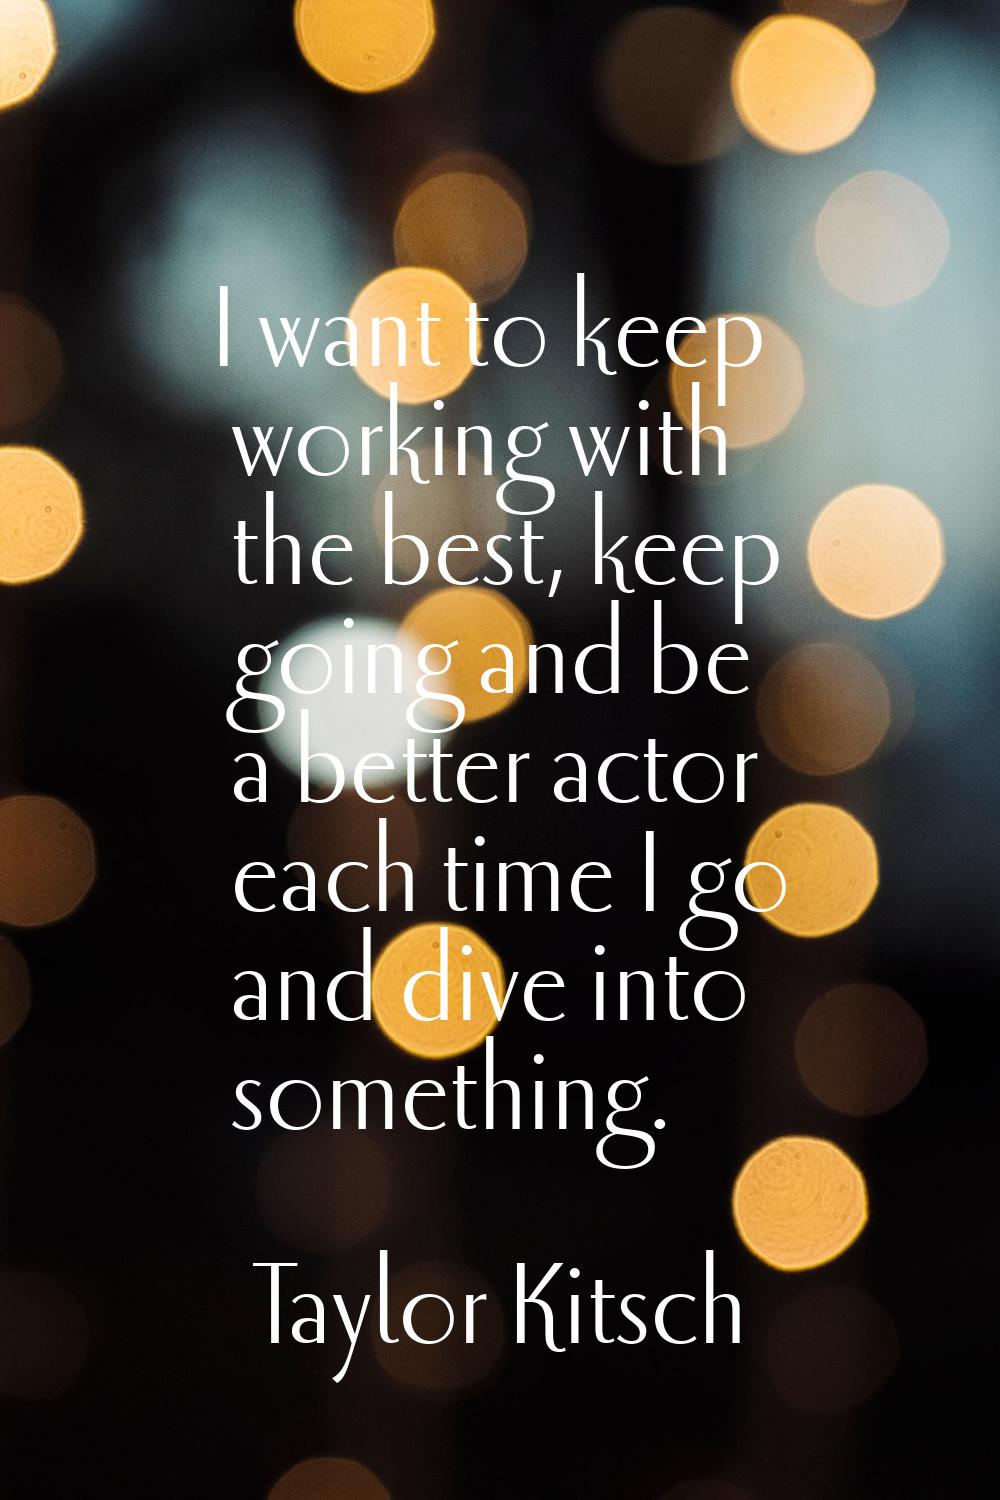 I want to keep working with the best, keep going and be a better actor each time I go and dive into